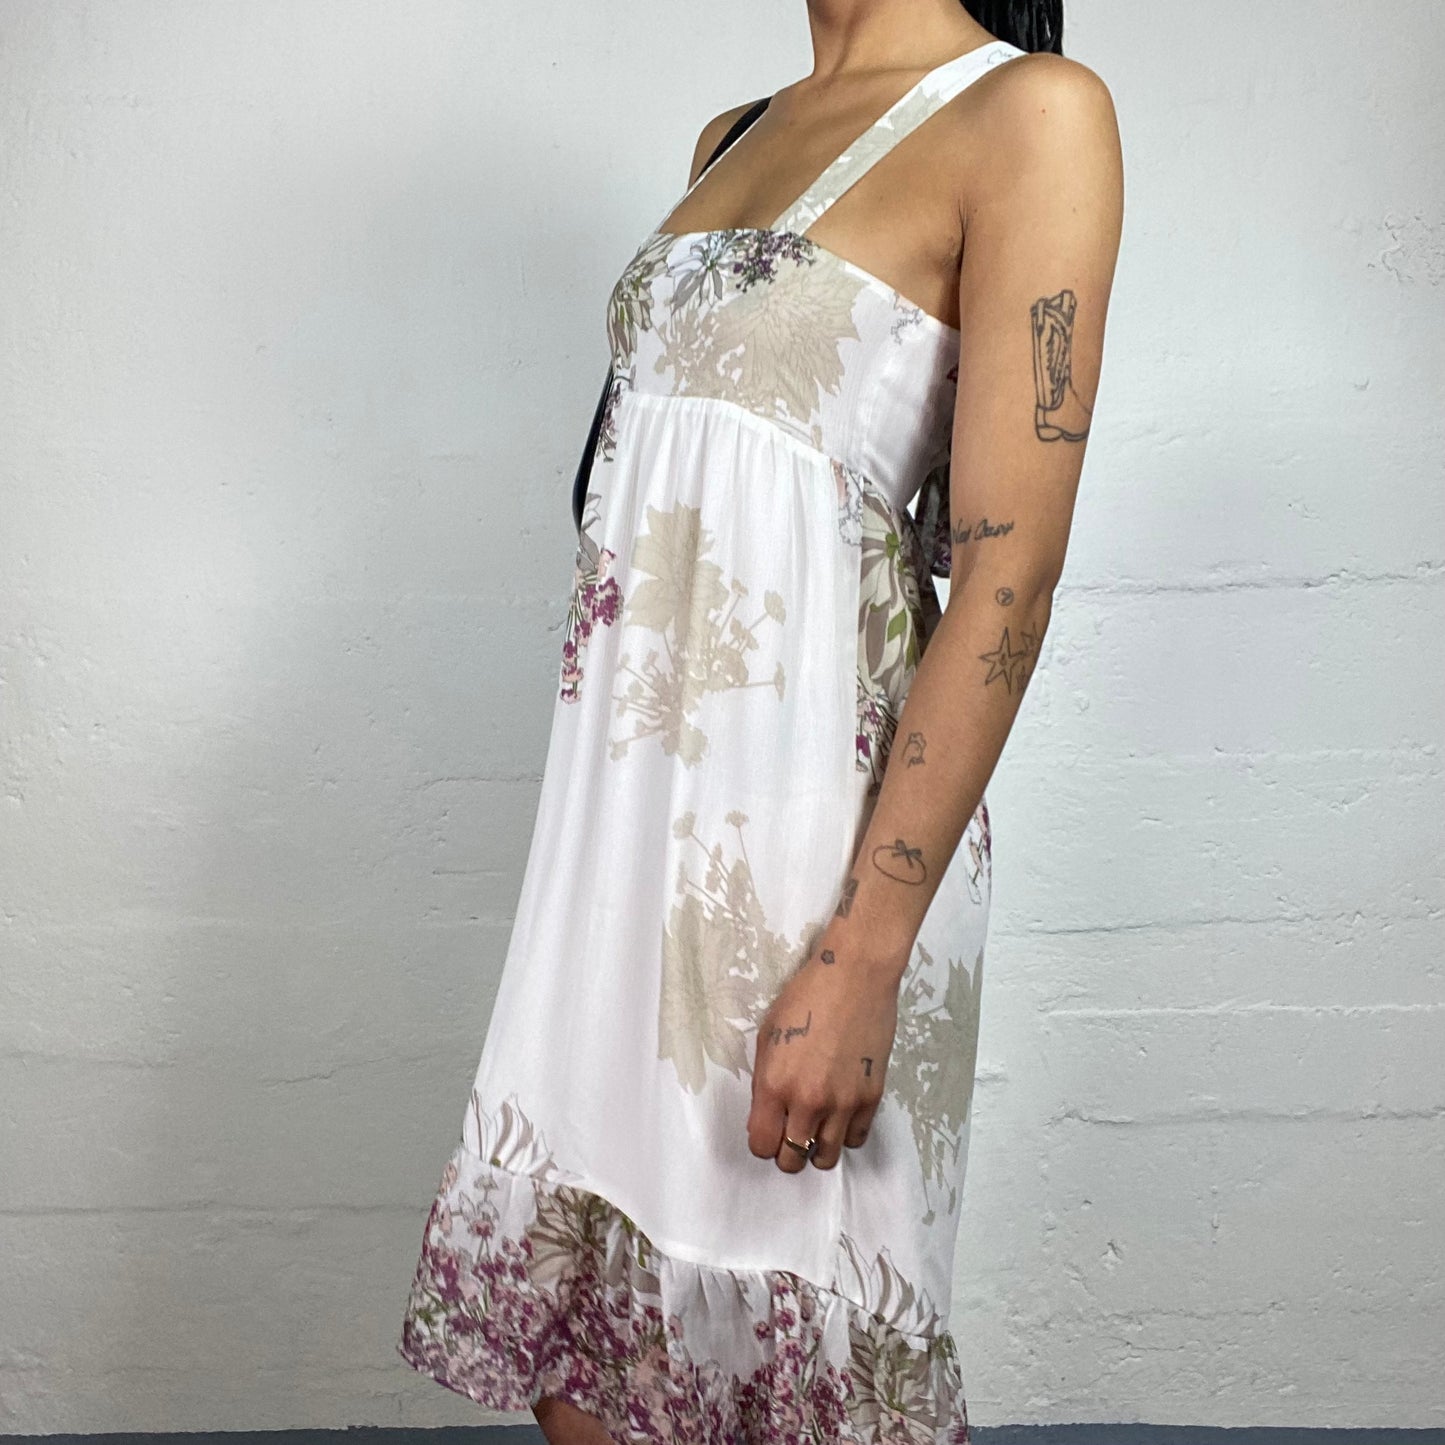 Vintage 2000's Summer White Chiffon Layered Midi Dress with Beige and Brown Toned Floral Prints (S)